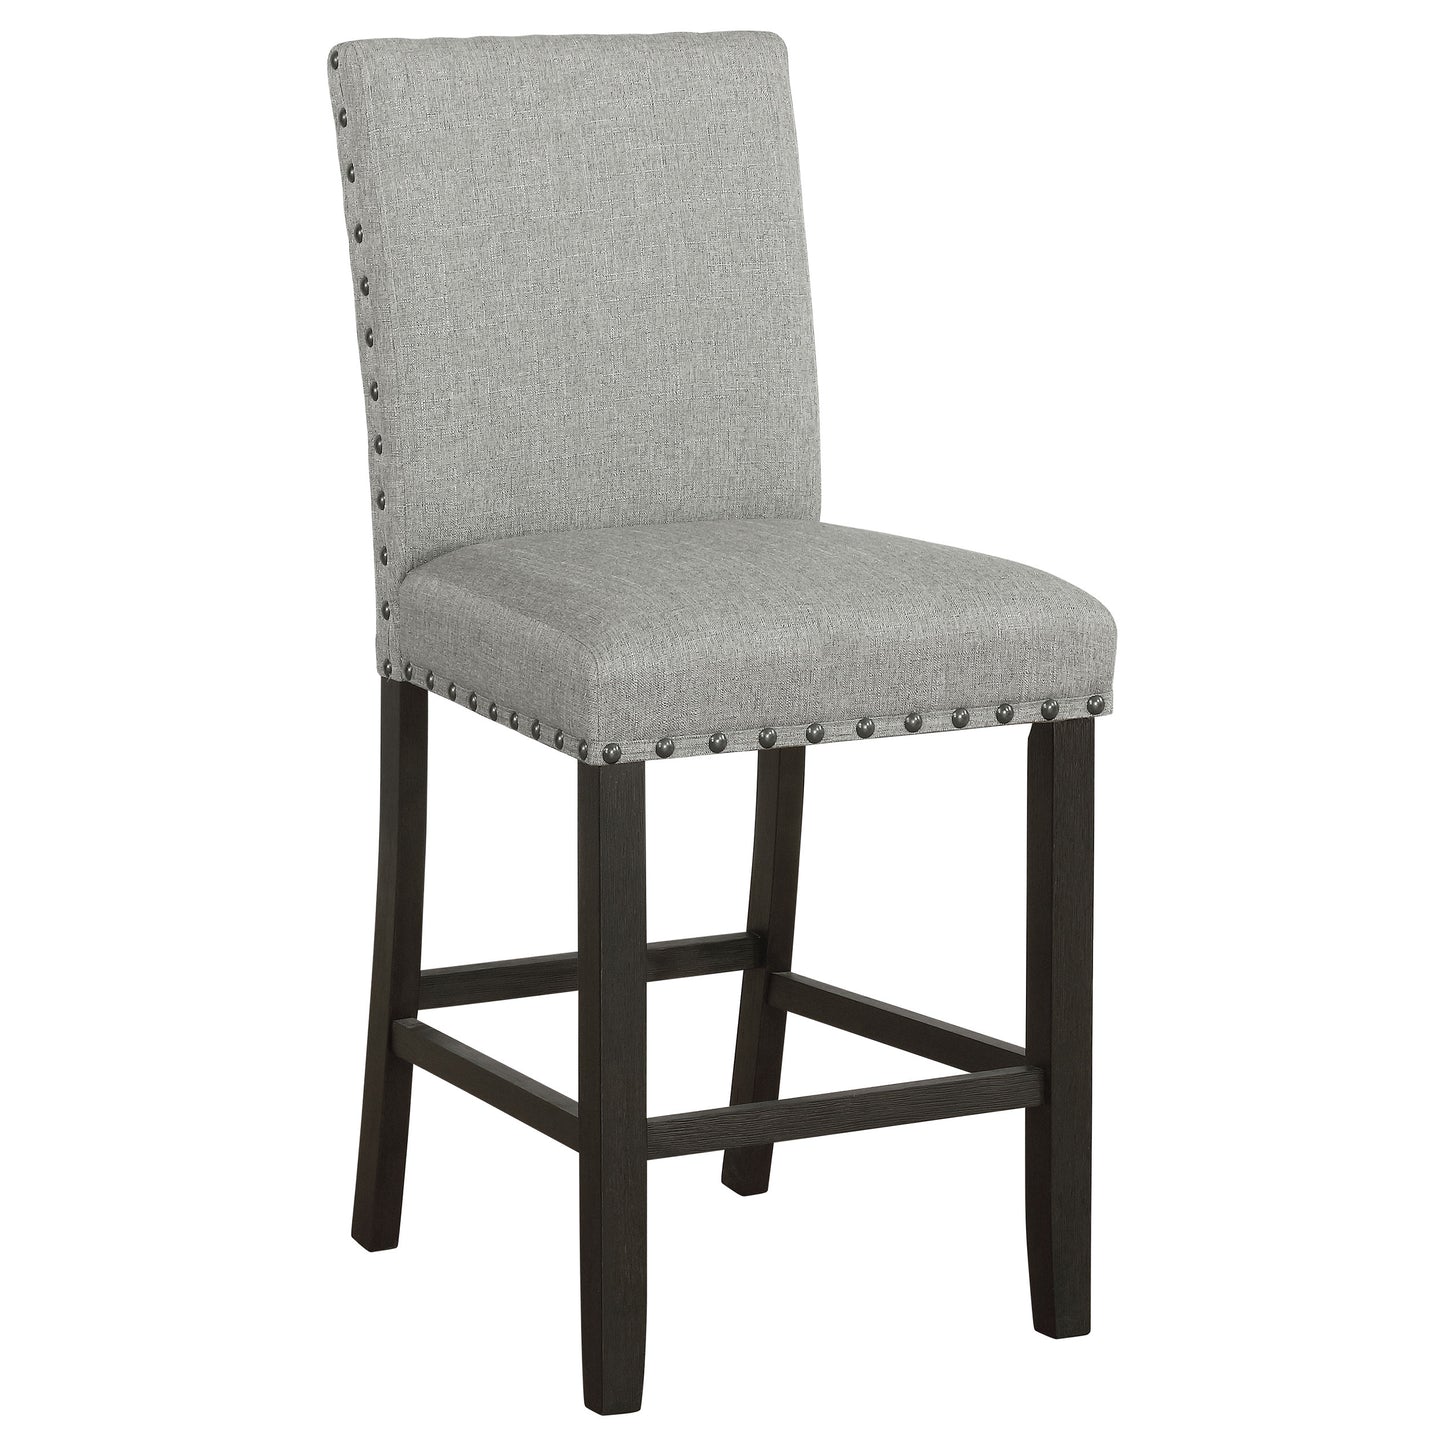 Kentfield Solid Back Upholstered Counter Height Stools Grey and Antique Noir (Set of 2)